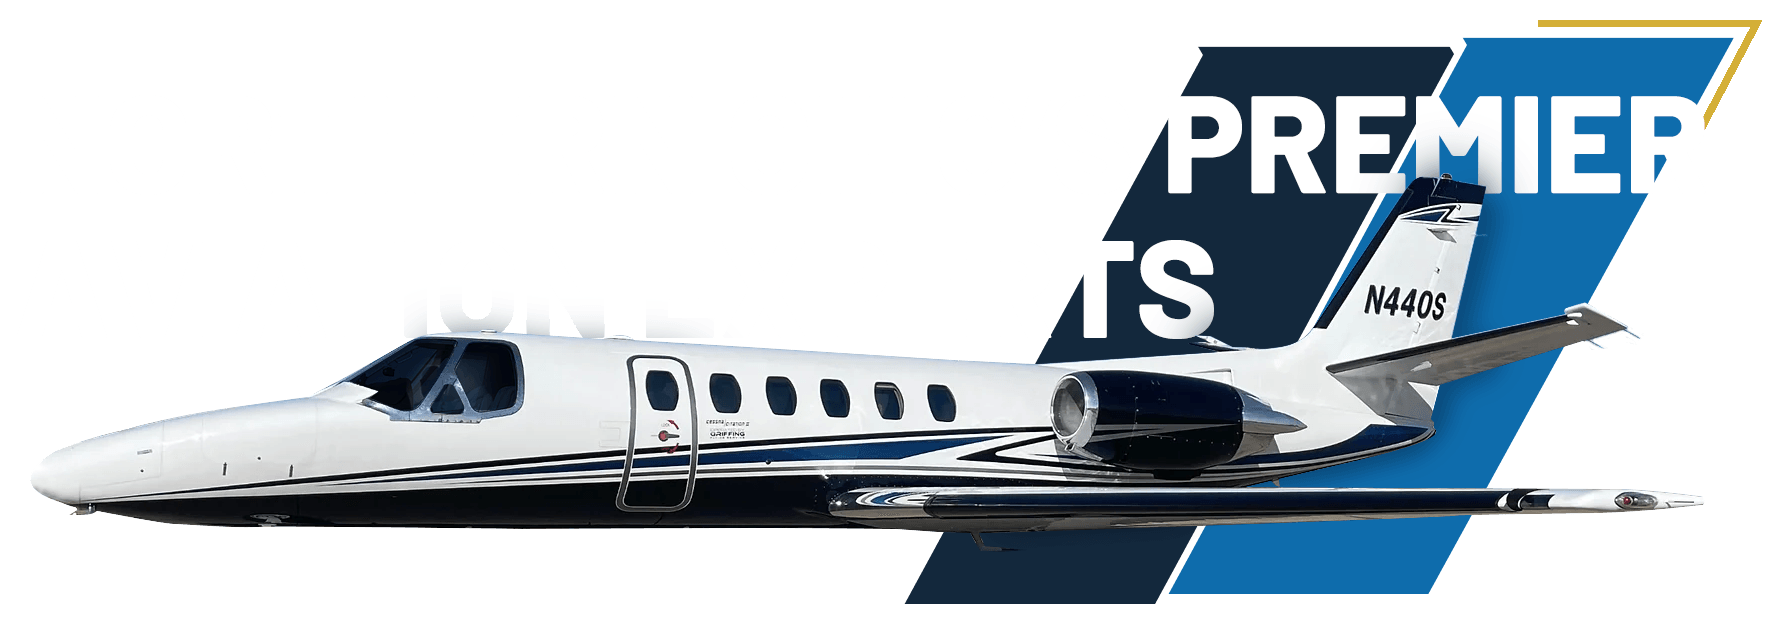 Northern Ohio's premier private plane/jet chartering service in Port Clinton, OH with daily service to Kelleys Island, Put-in-Bay/Middle Bass, Pelee Island, Canada